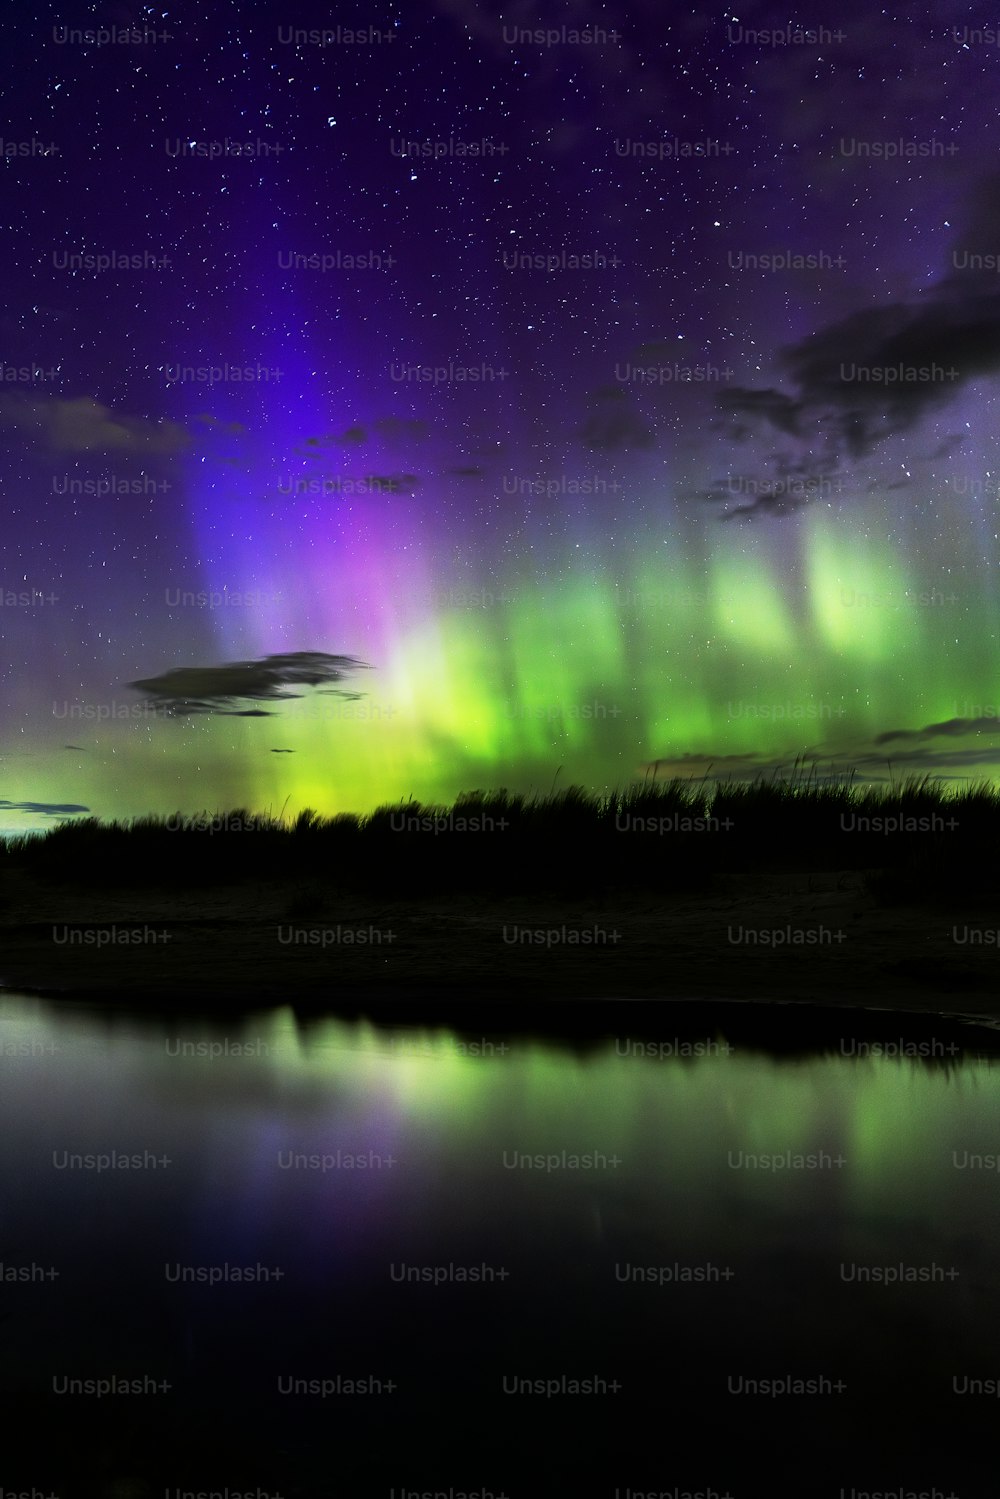 the aurora bore is reflected in the water